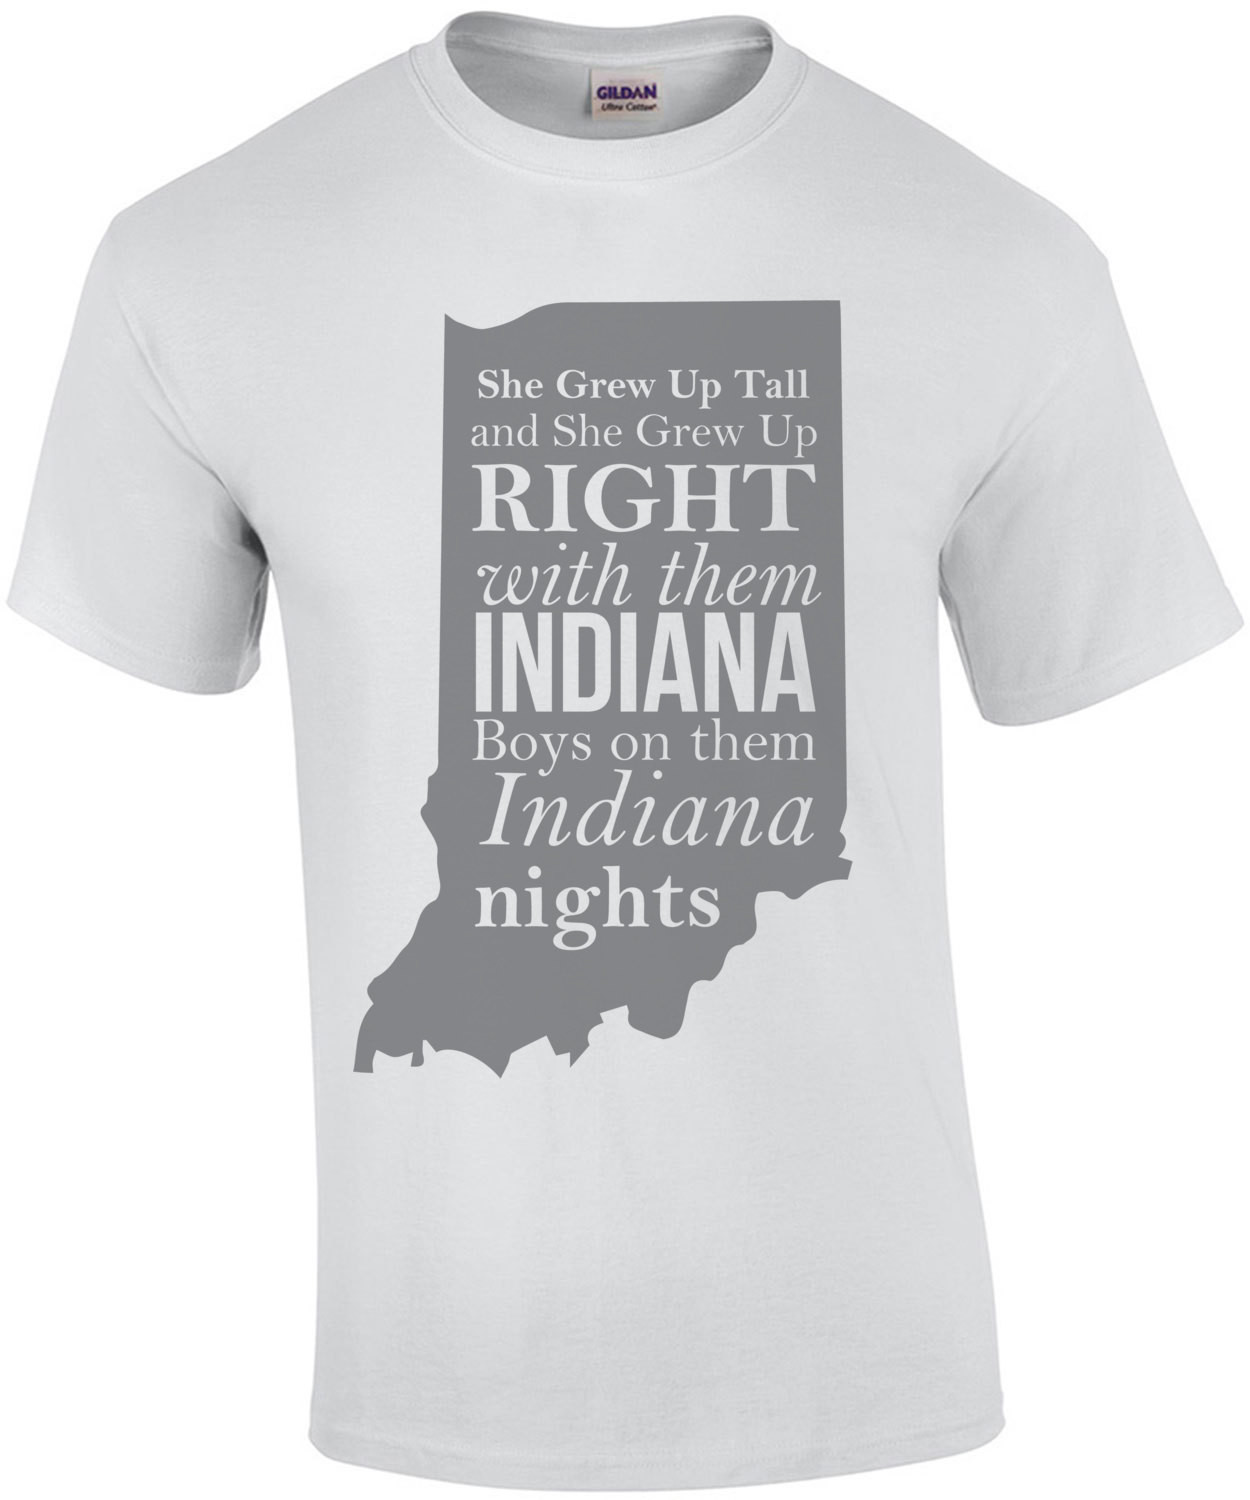 She grew up tall and she grew up right with them Indiana boys on them Indiana nights - Tom Petty Indiana T-Shirt